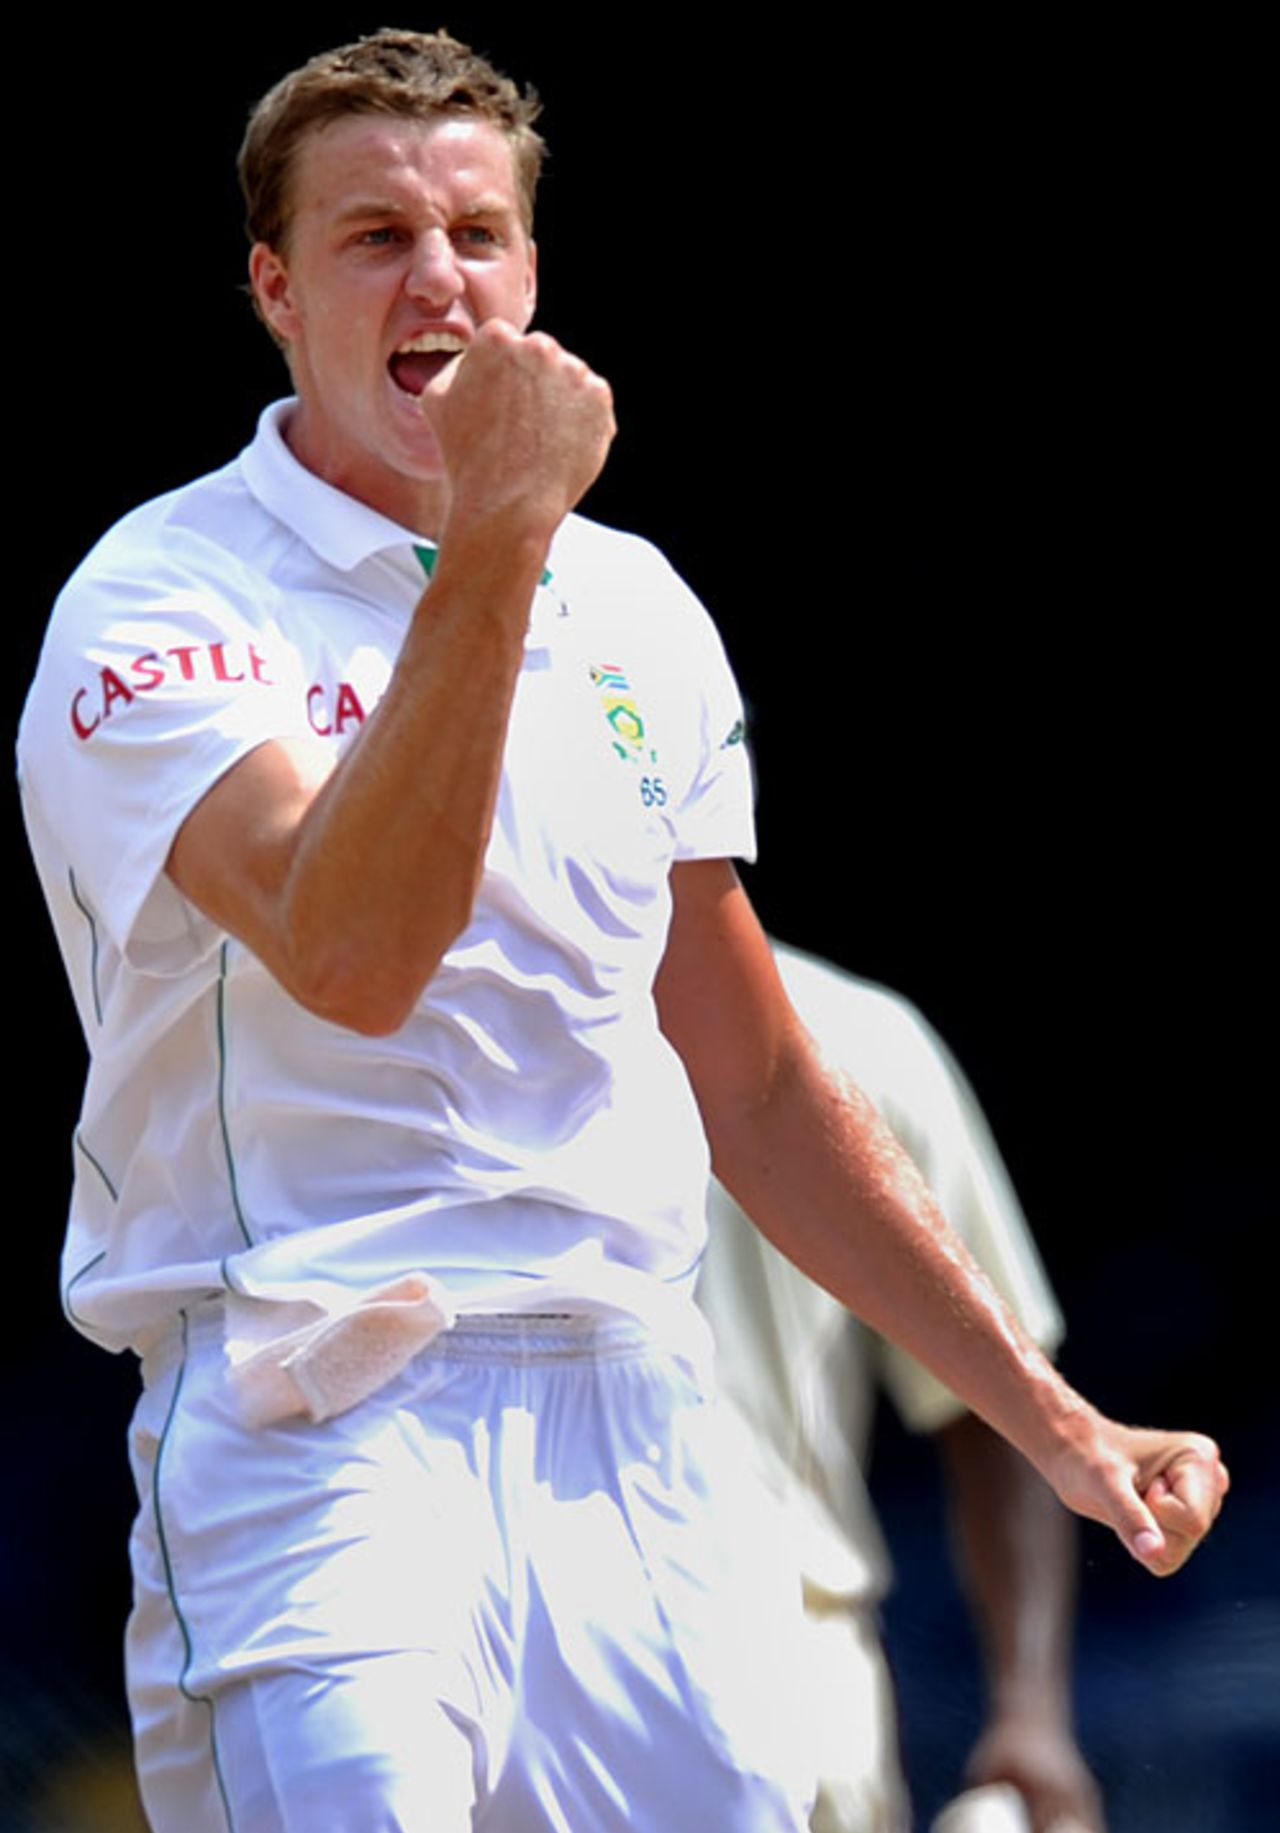 Morne Morkel celebrates after claiming the crucial wicket of Chris Gayle for the second time in the match, West Indies v South Africa, 1st Test, Trinidad, 4th day, June 13, 2010